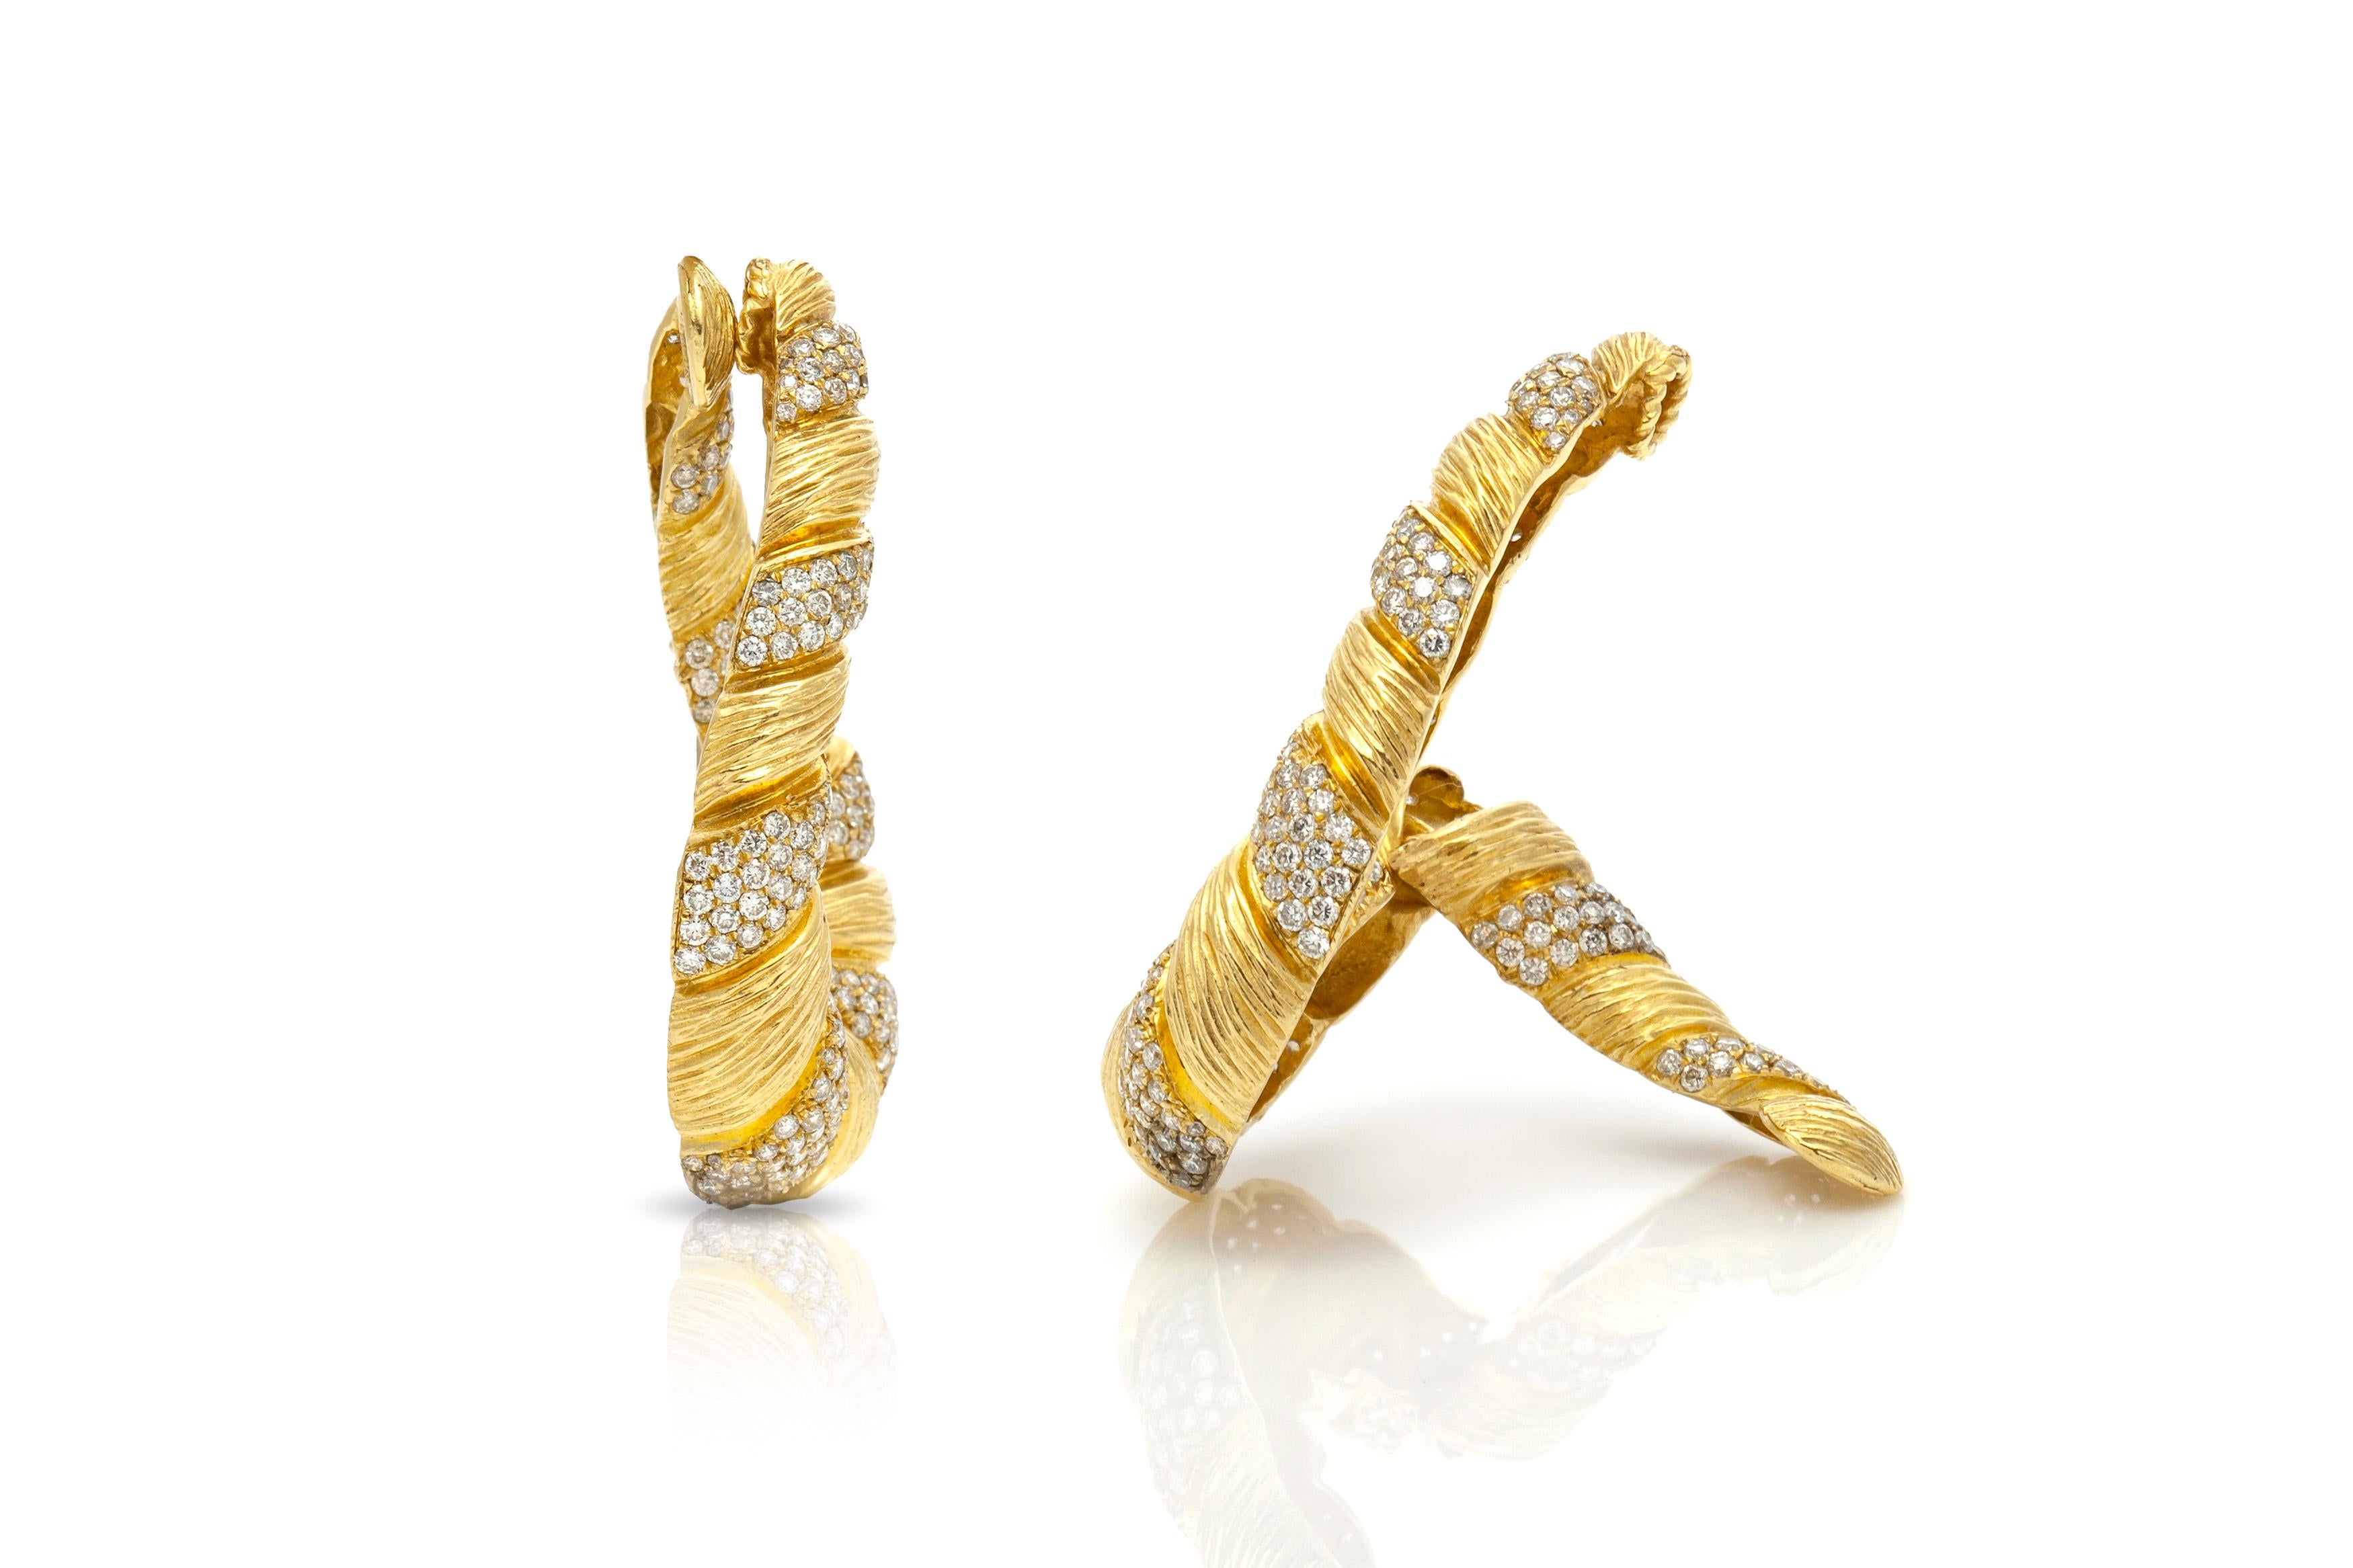 Hoop earrings, finely crafted in 18k yellow gold with diamonds weighing approximately a total of 6.50 carats. Circa 1970's.